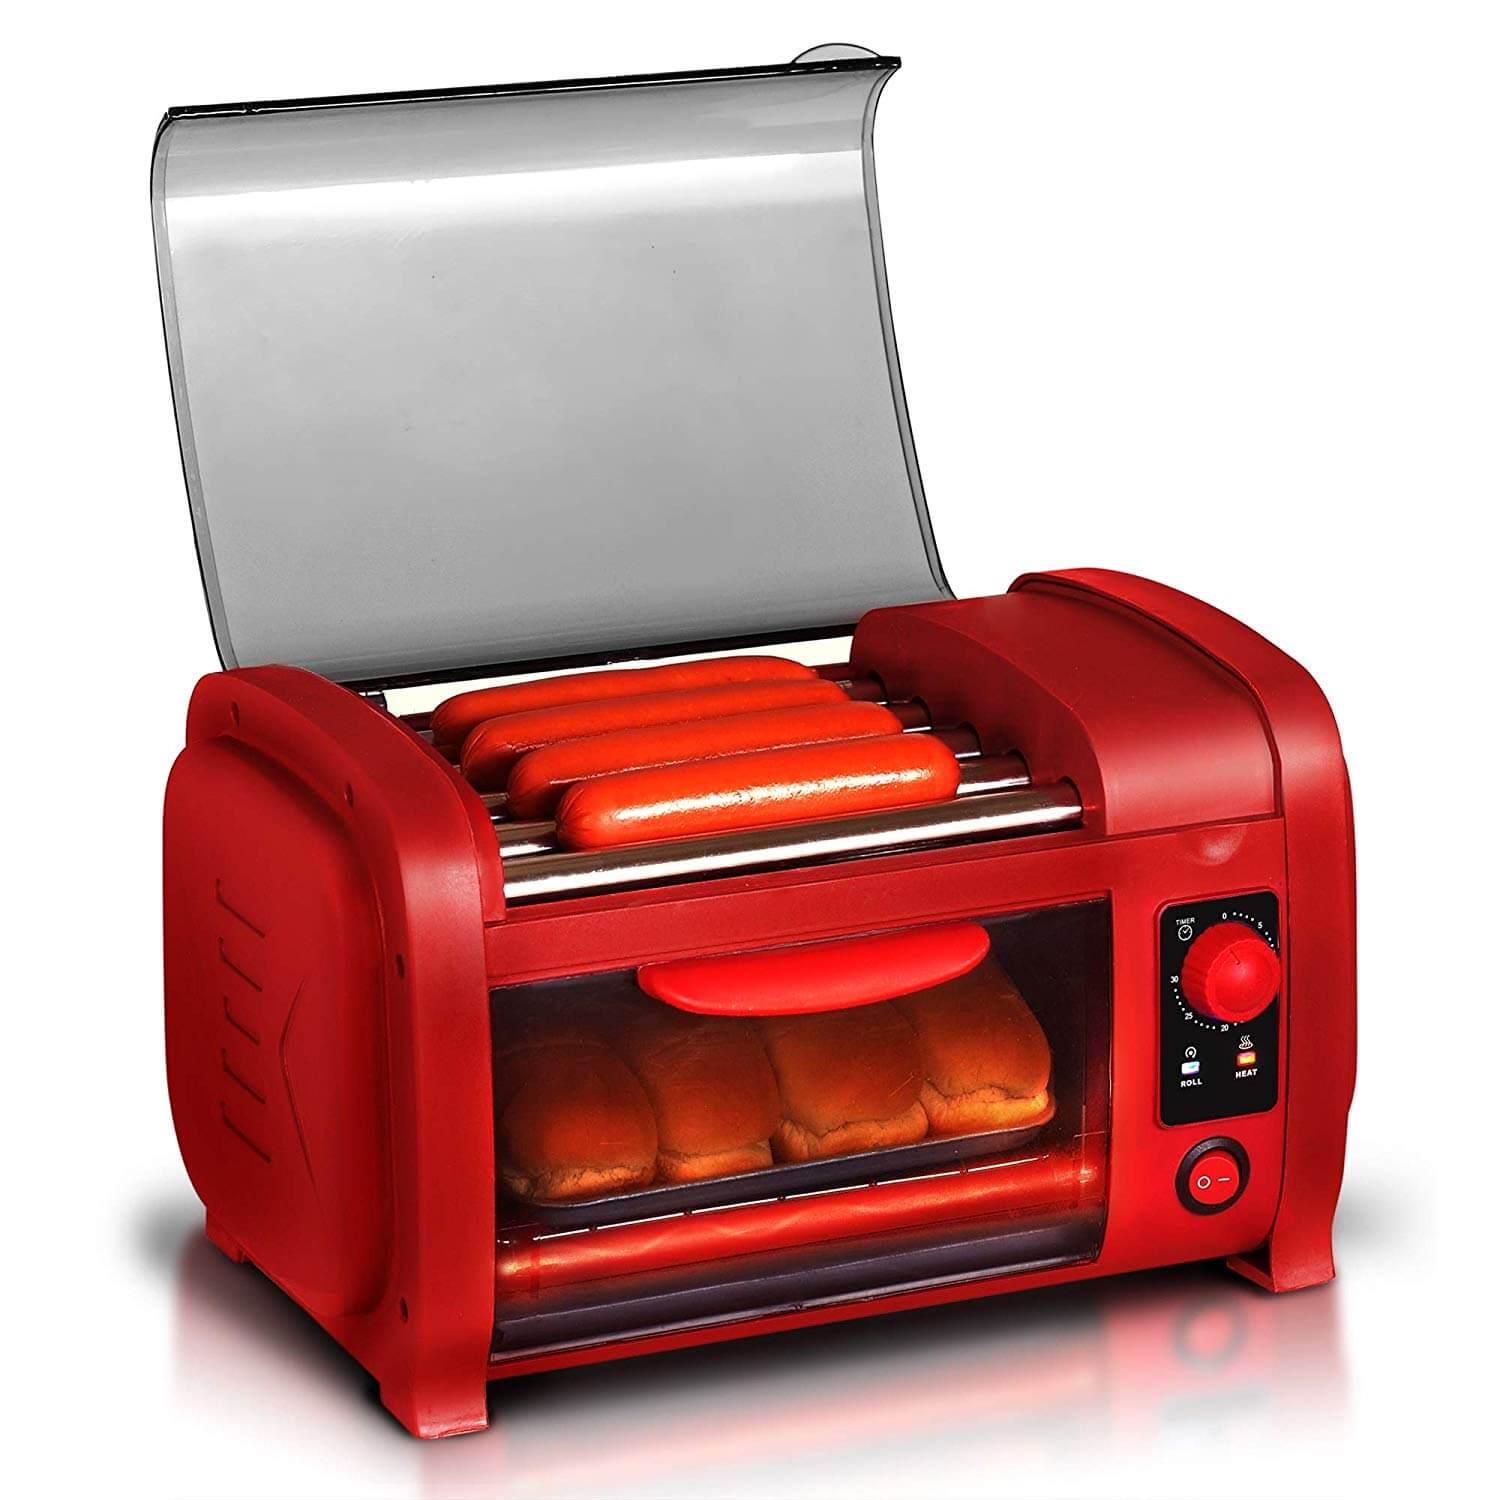 Hot Dog Toaster Review- [2020 Expert Buyer’s Guide]